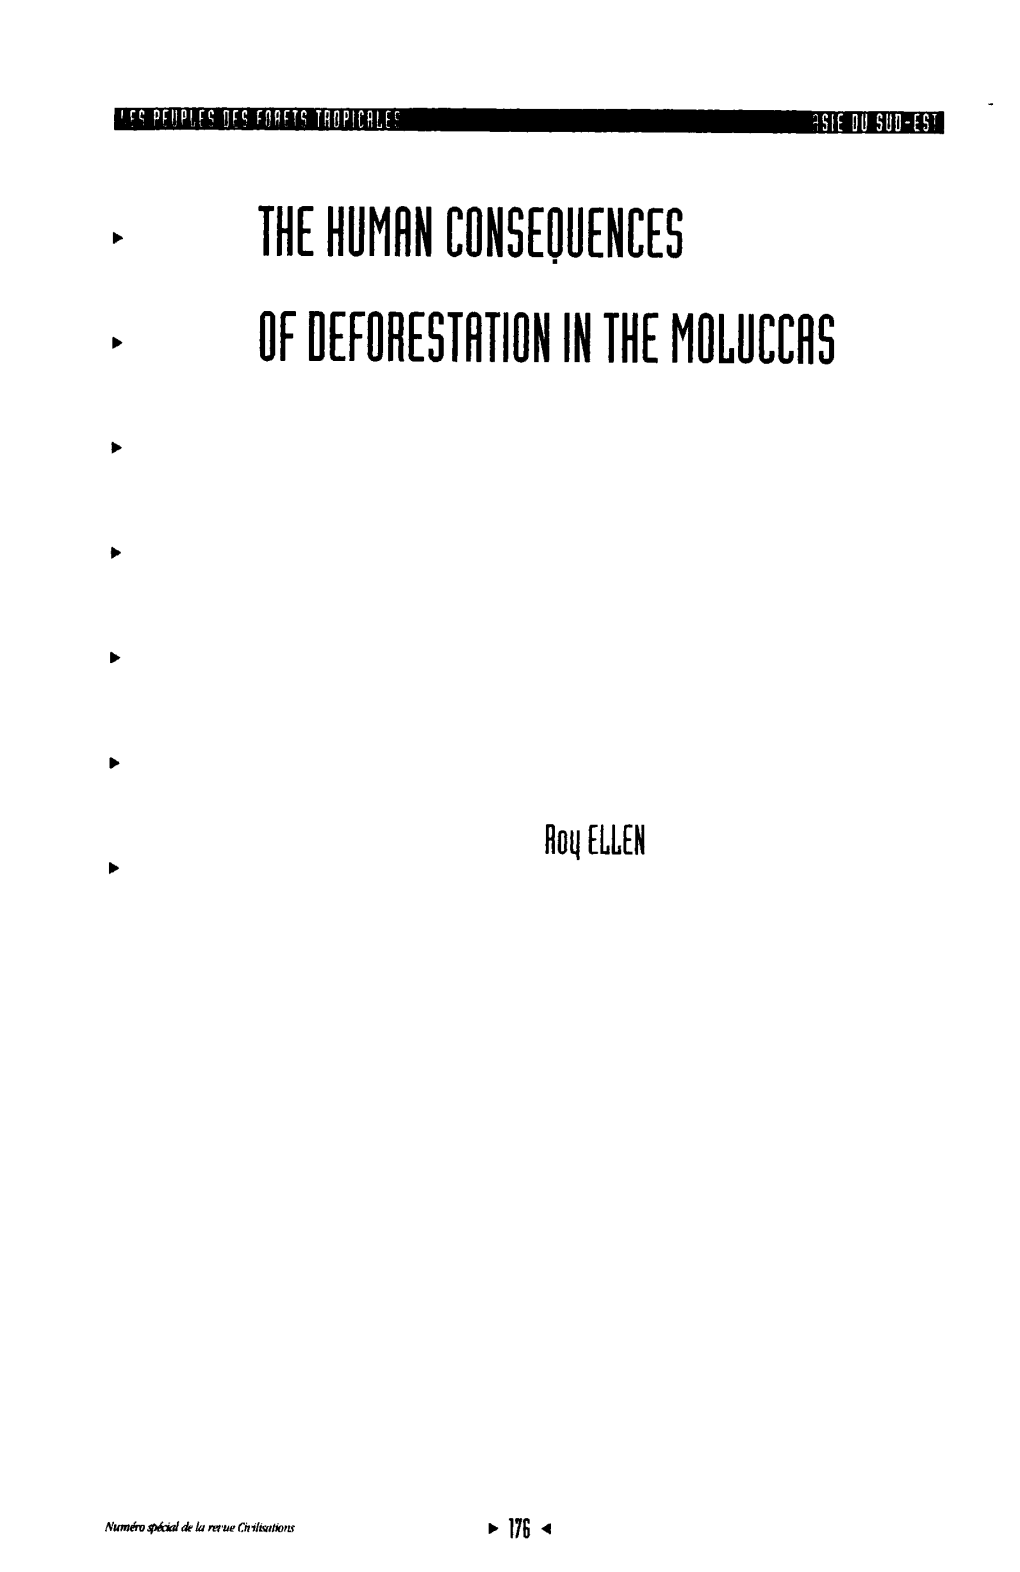 The Human Consequences of Deforestation in the Moluccas